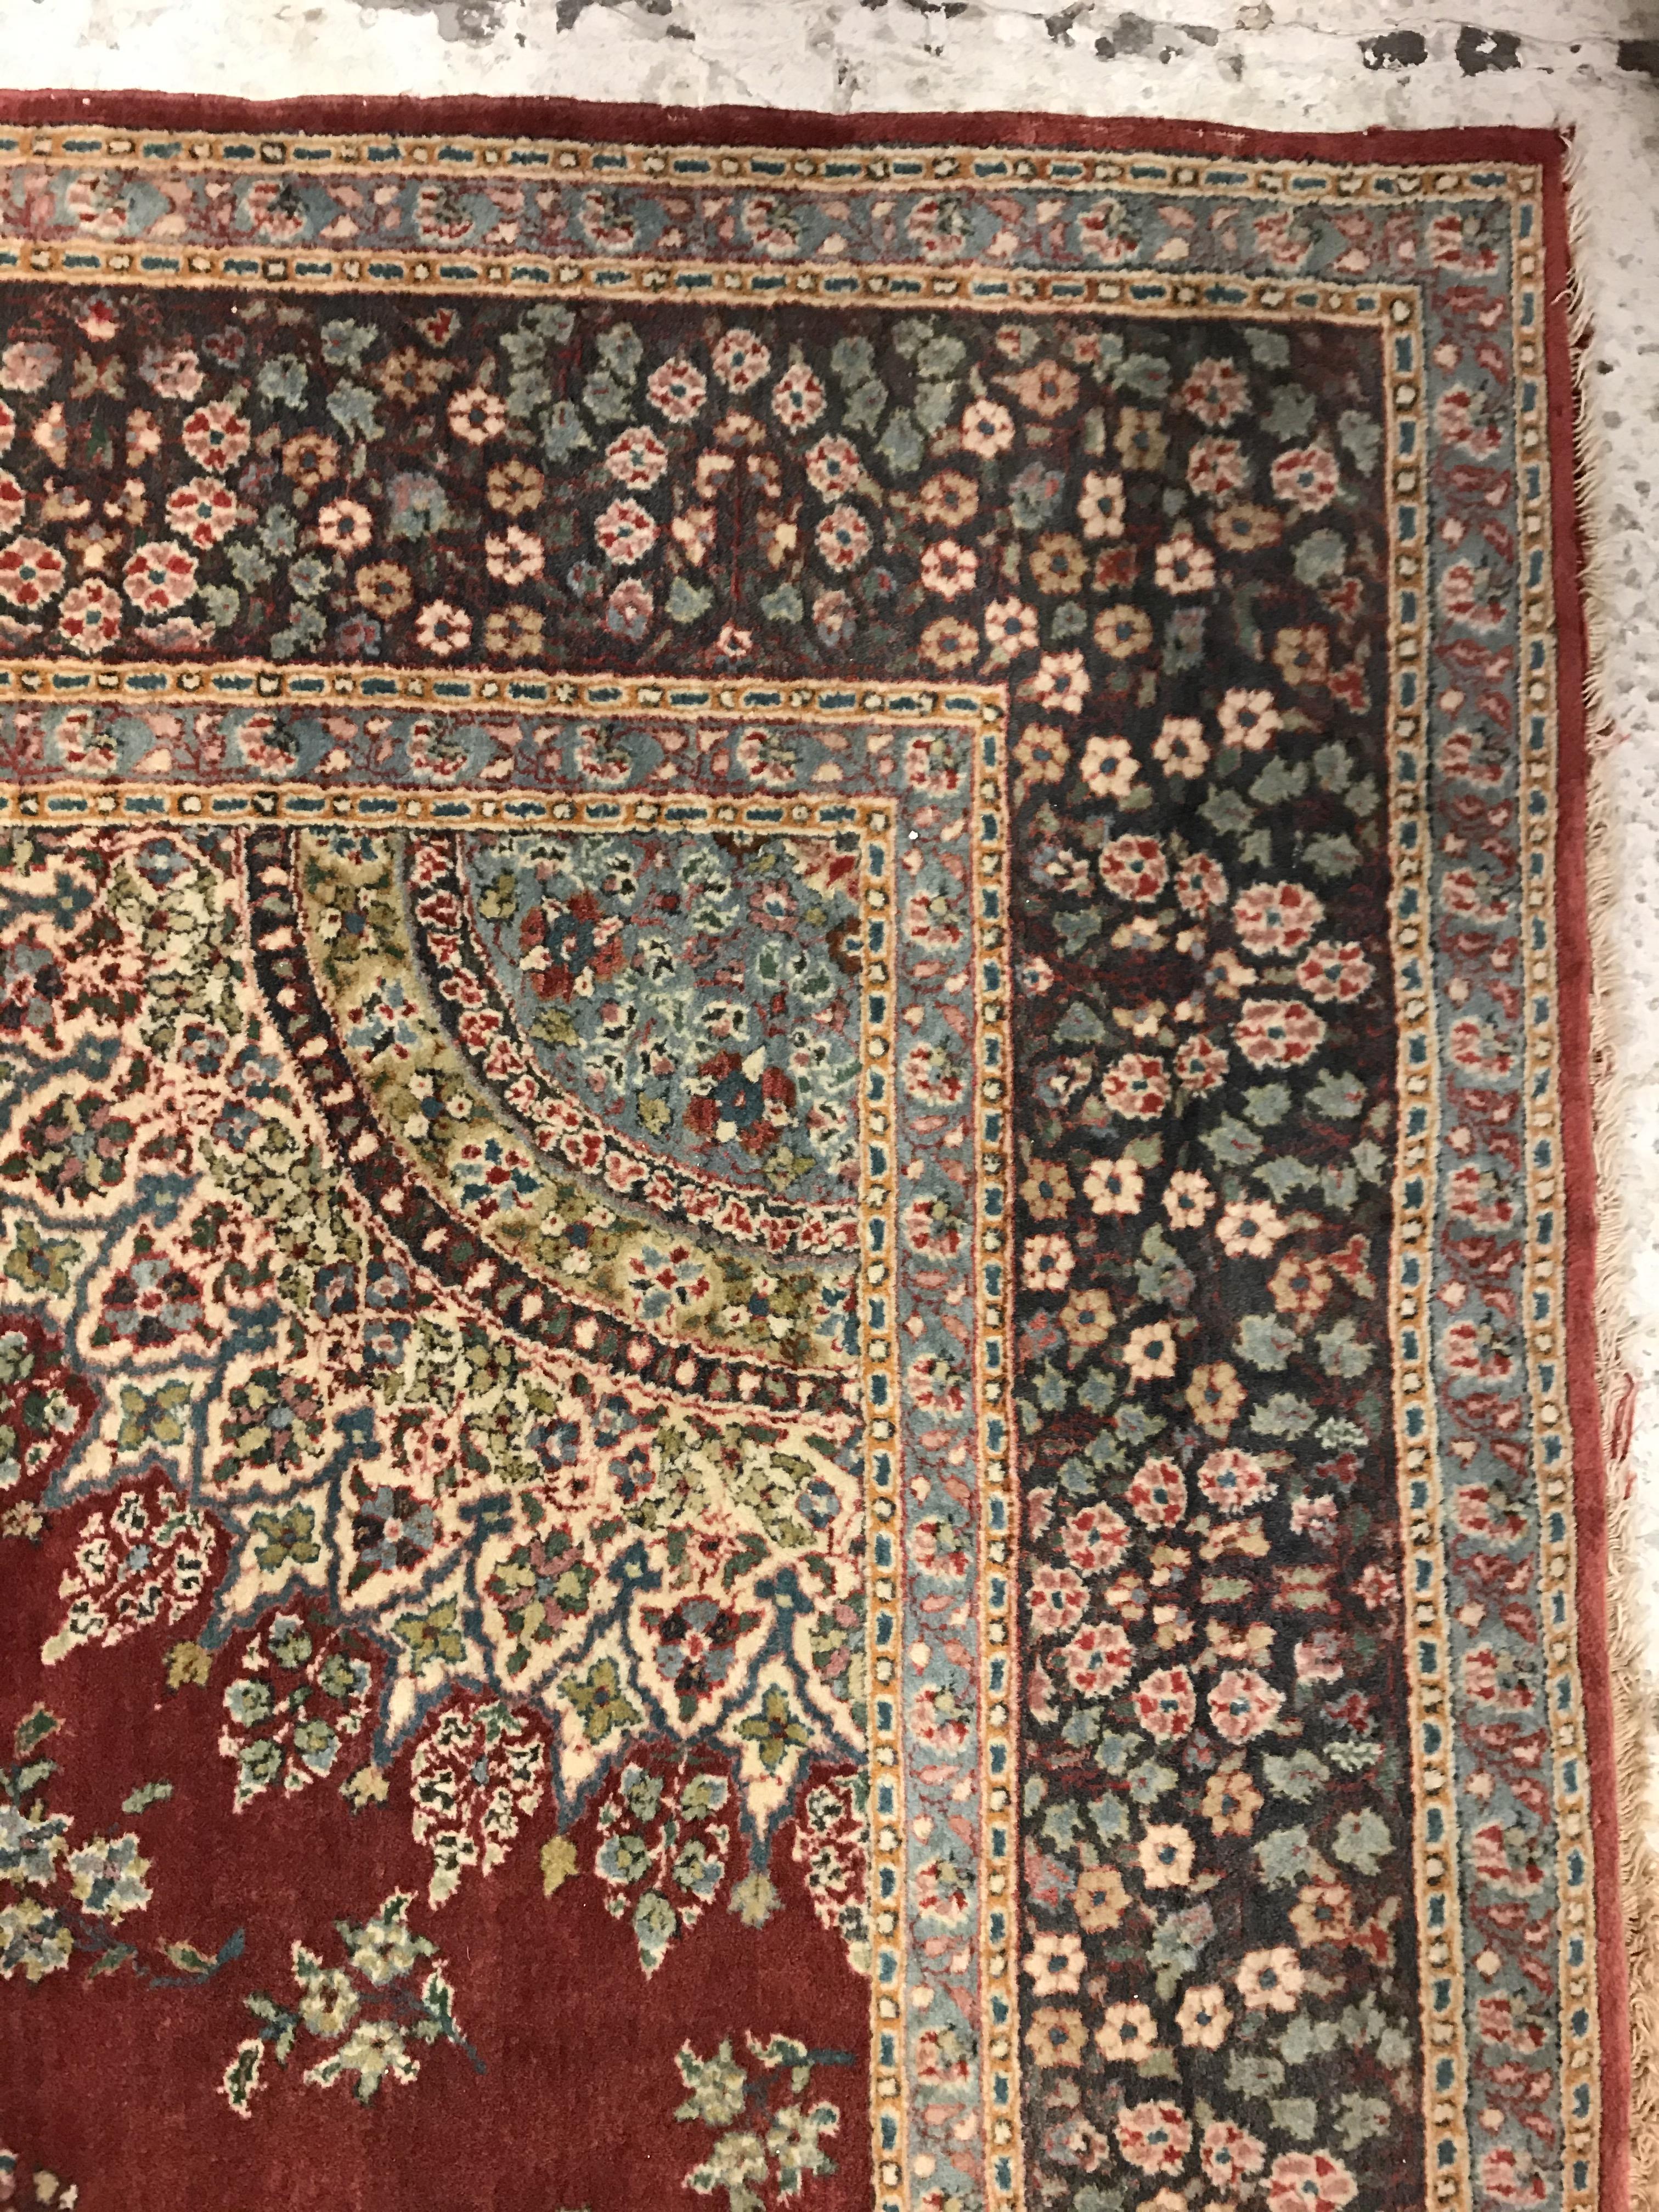 A pair of fine Oriental rugs, the central panels each set with floral decorated circular medallion - Image 34 of 41